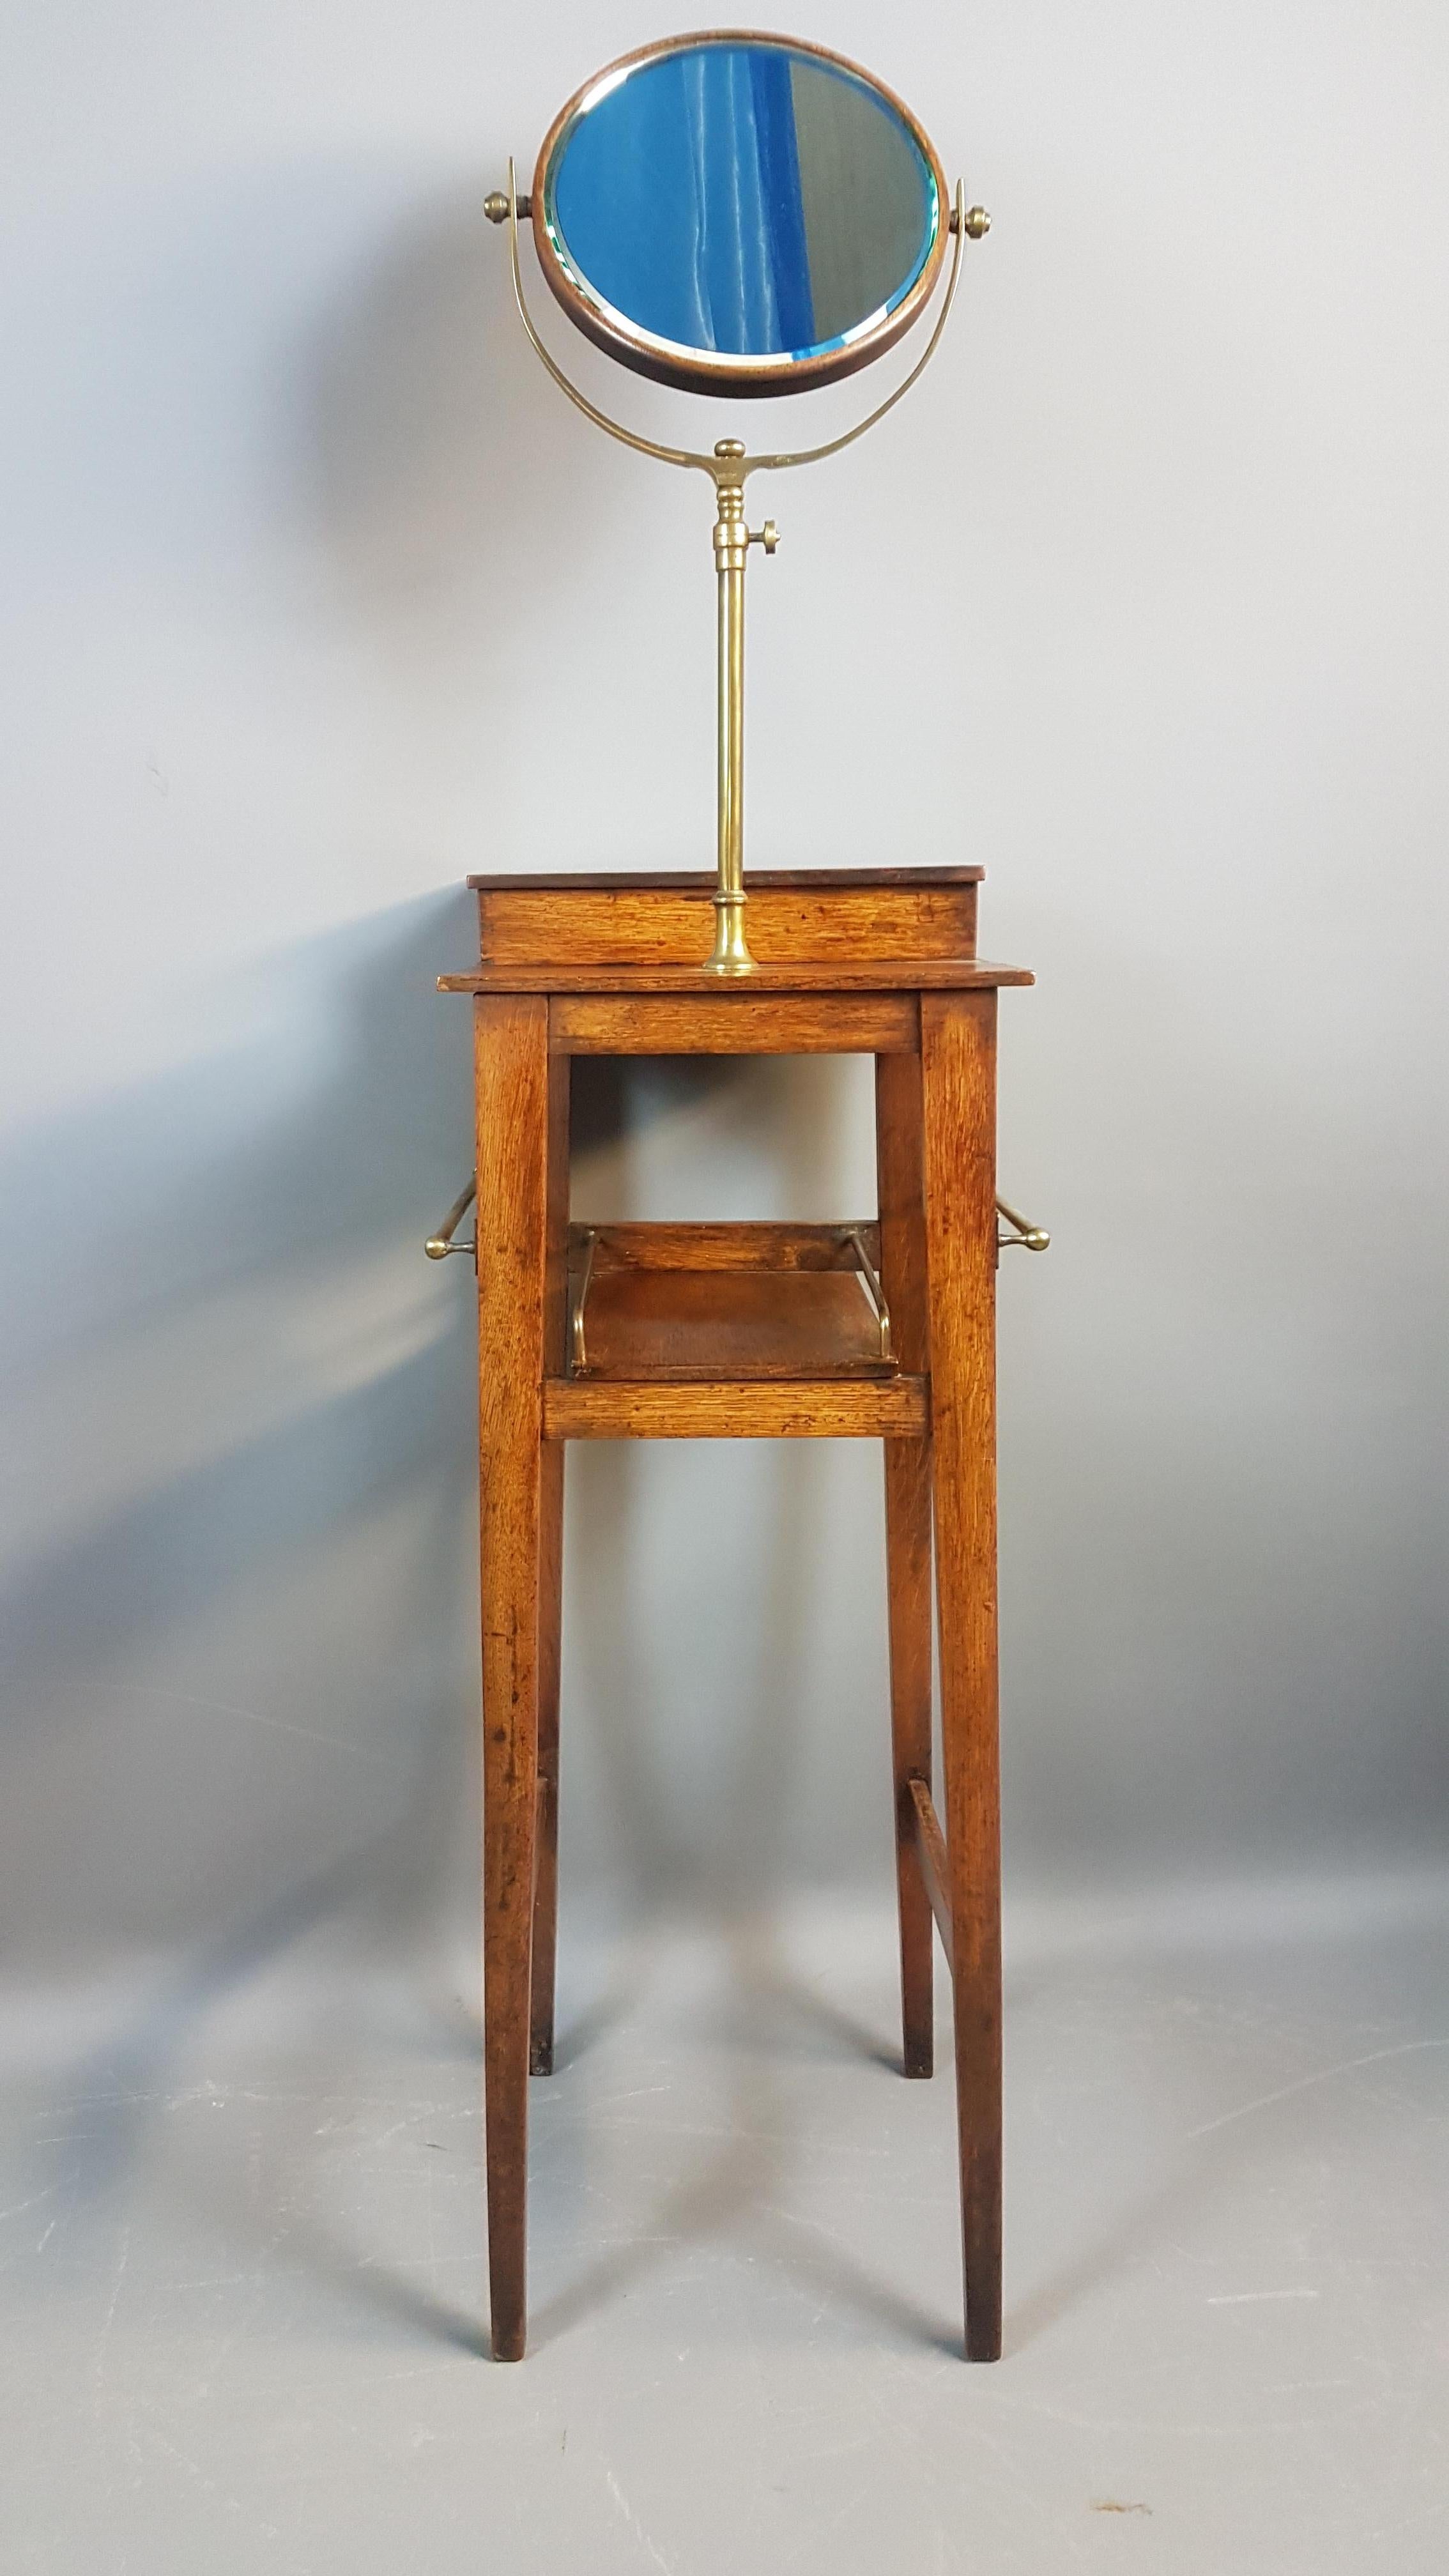 A superb oak Arts & Crafts shaving stand in the manner of liberty’s. It is of the same quality and similar in design to those sold by the London retailer during the late 19th and early 20th century. The oak framed mirror is adjustable on the brass